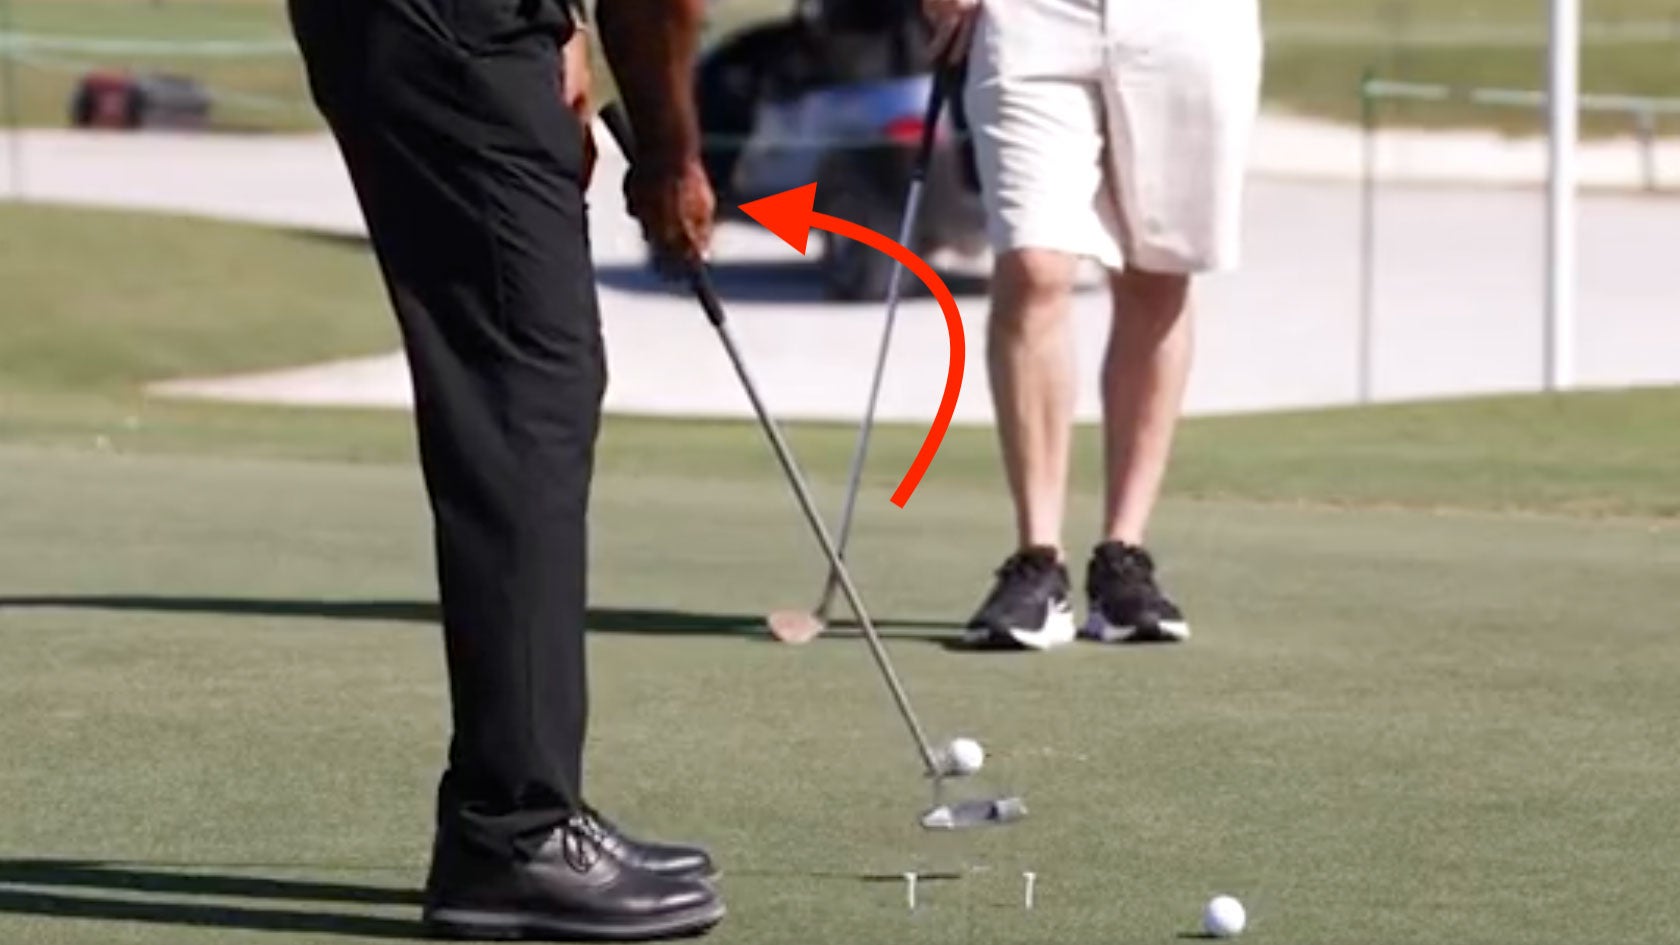 Tiger woods working on one-handed putting drill at hero world challenge